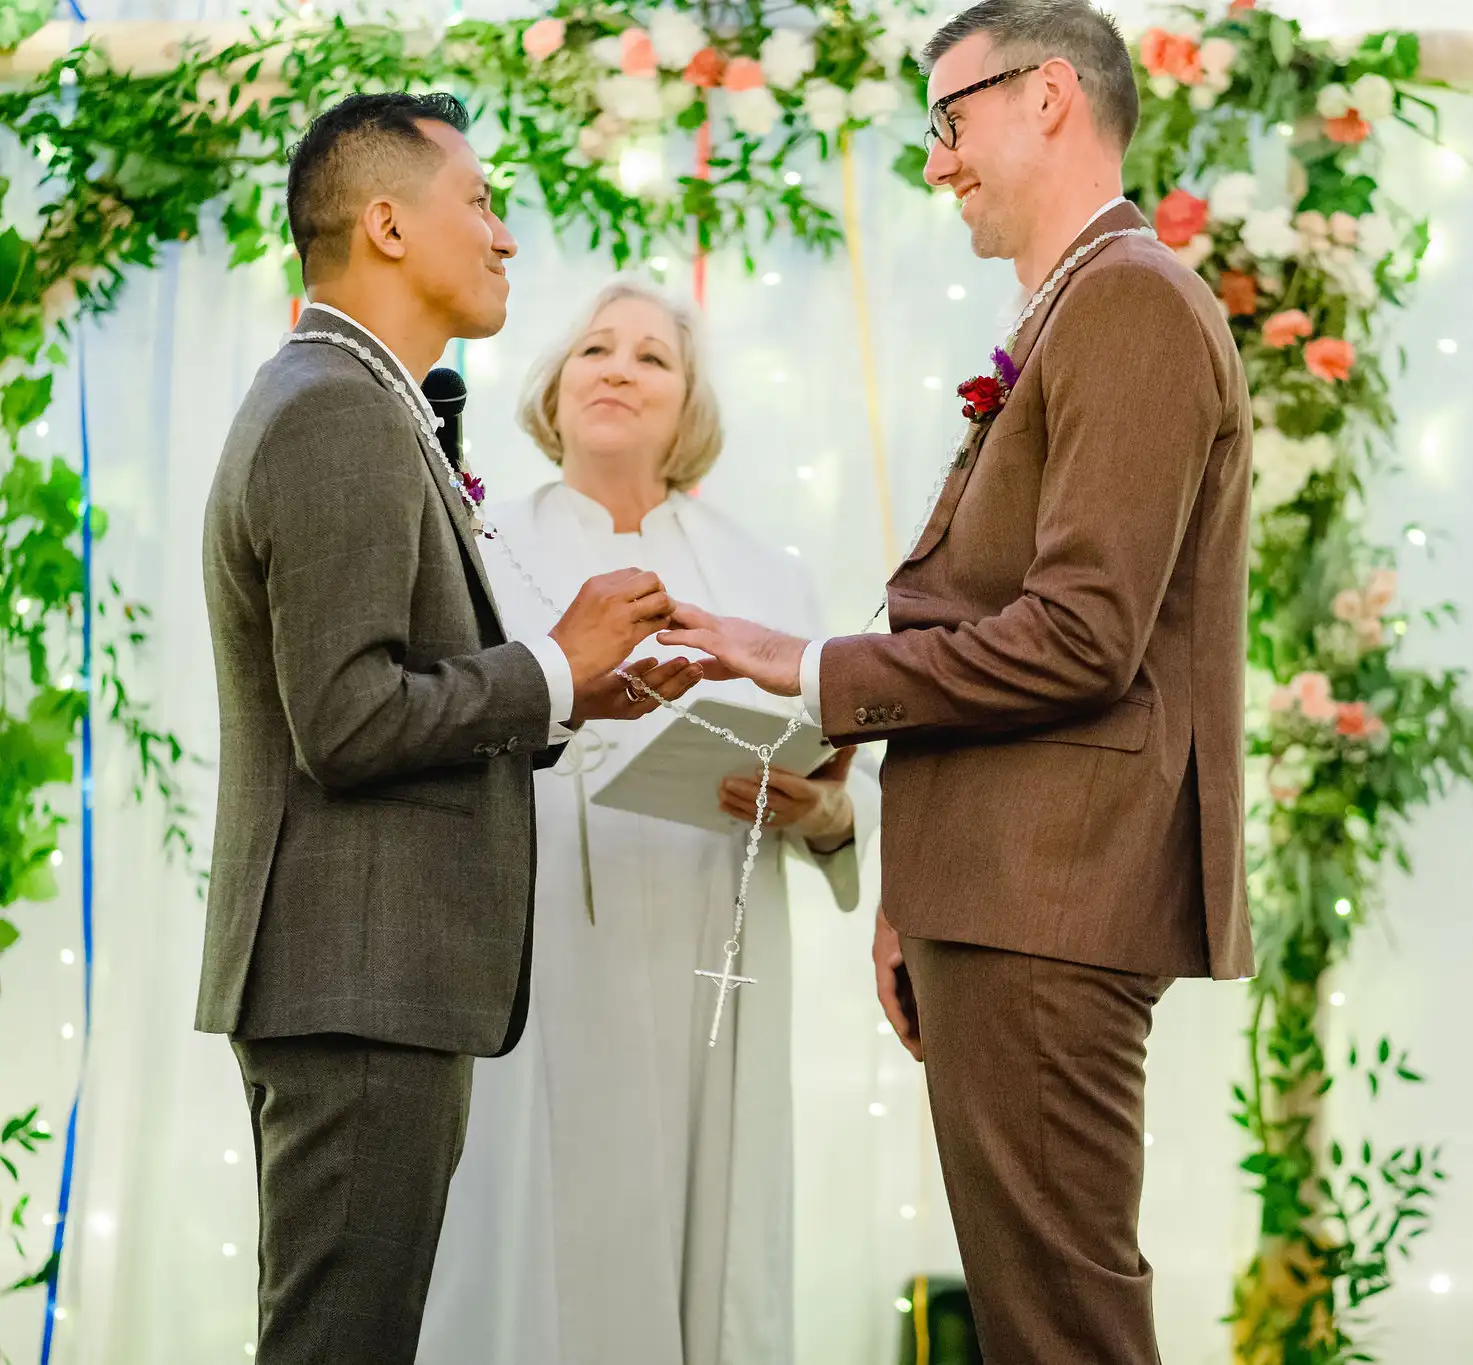 We offer bilingual officiant services